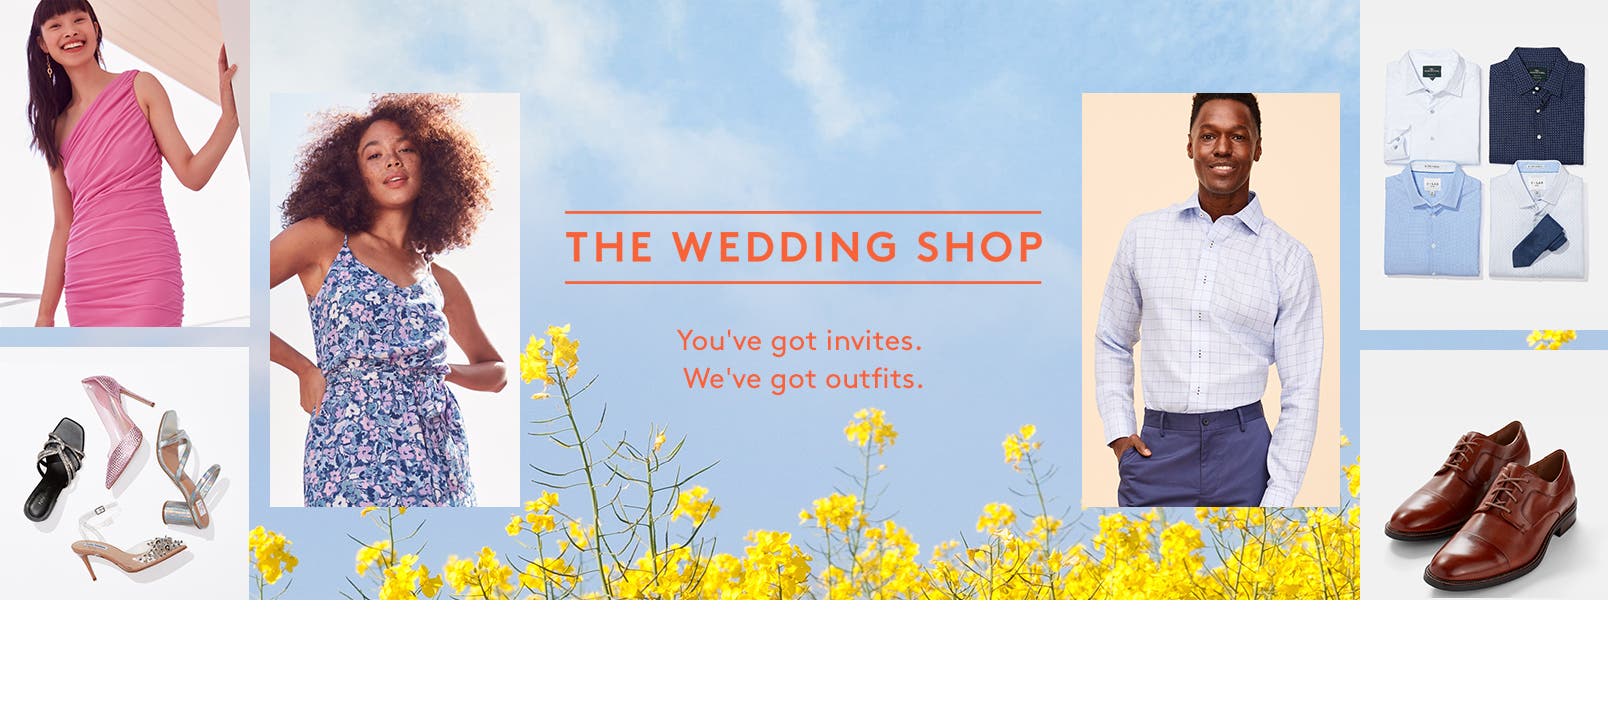 The wedding shop up to sixty five percent off.